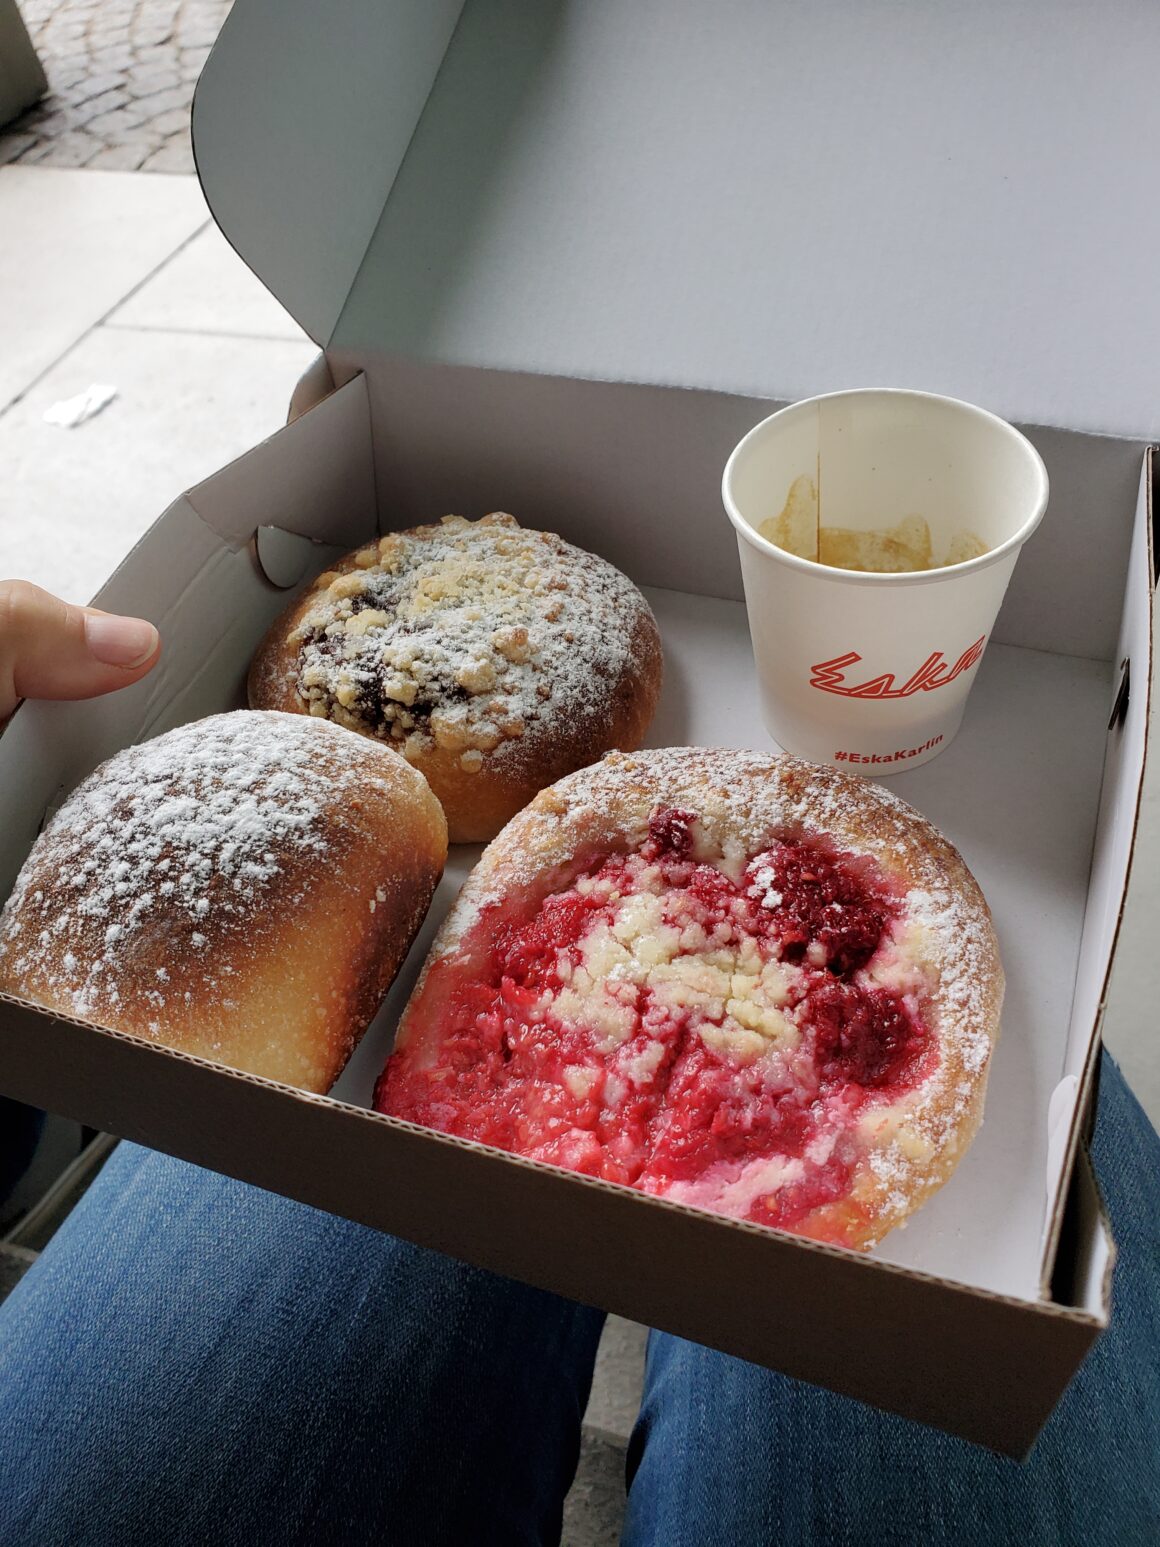 Kolac and buchty, two Czech baked goods featuring fresh fruit in yeasted dough, in a take out box alongside a small cup of espresso.